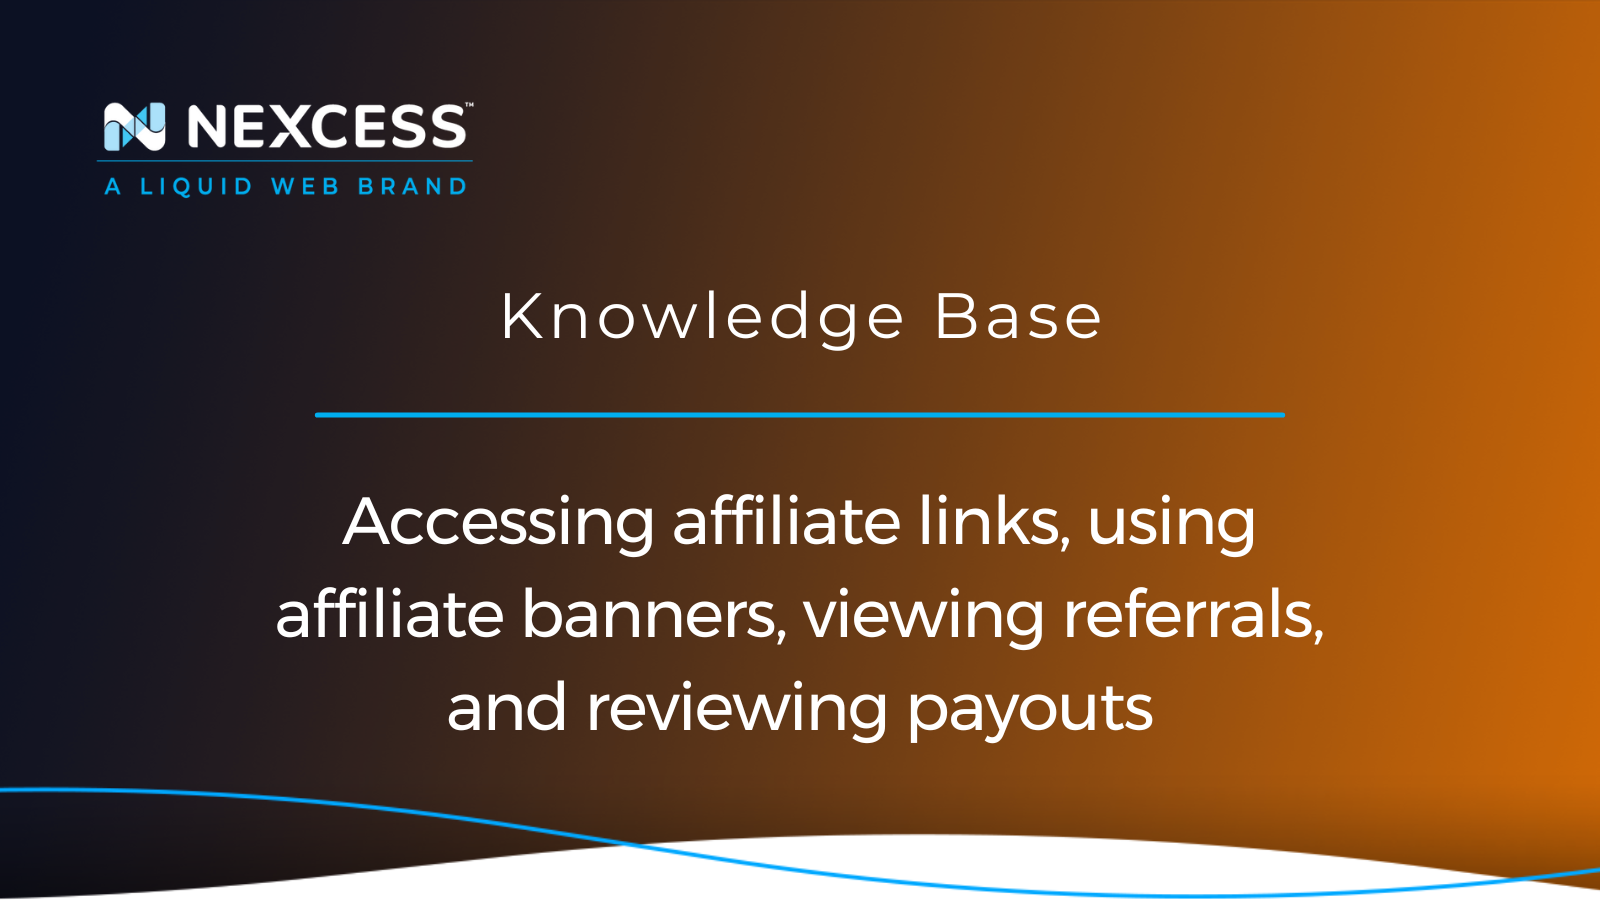 Accessing affiliate links, using affiliate banners, viewing referrals, and reviewing payouts